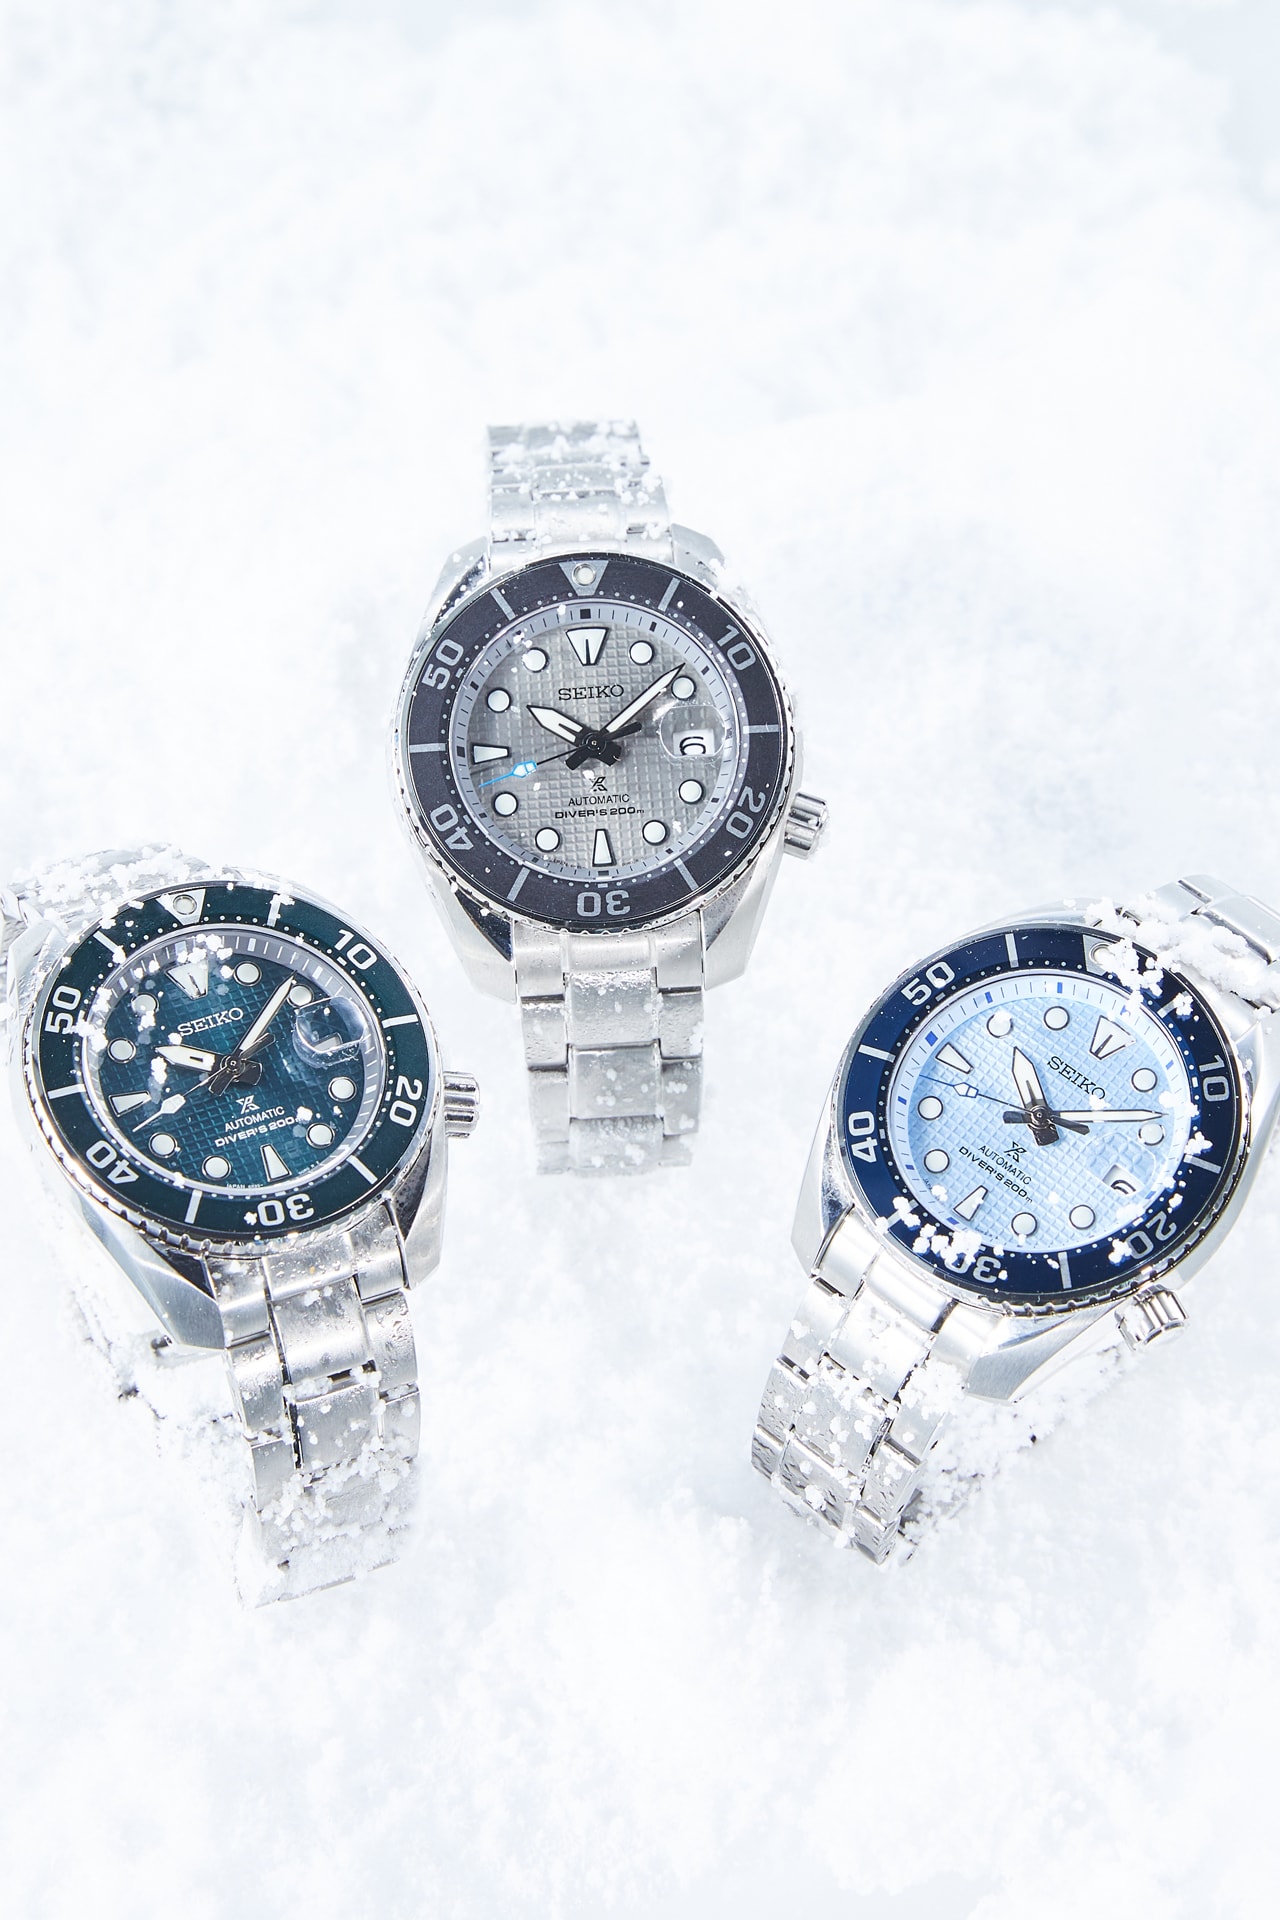 Seiko Prospex U.S. Special Edition watch Japanese watchmaker divers collection glacial ice JARE Naomi Uemura Yuichiro Miura gray (SPB175), green (SPB177) and light blue (SPB179) 200 meters technology design timepiece unidirectional rotating elapsed timing bezel, toned to match each dial, secured screwdown crown, a scratch-resistant sapphire crystal and caseback tri-fold push button release clasp 24-jewel automatic movement, caliber 6R35, beats at a frequency of 21,600 vibrations per hour, with a power reserve of approximately 70 hours, manual and automatic winding capabilities LumiBrite hands markers magnified date windows